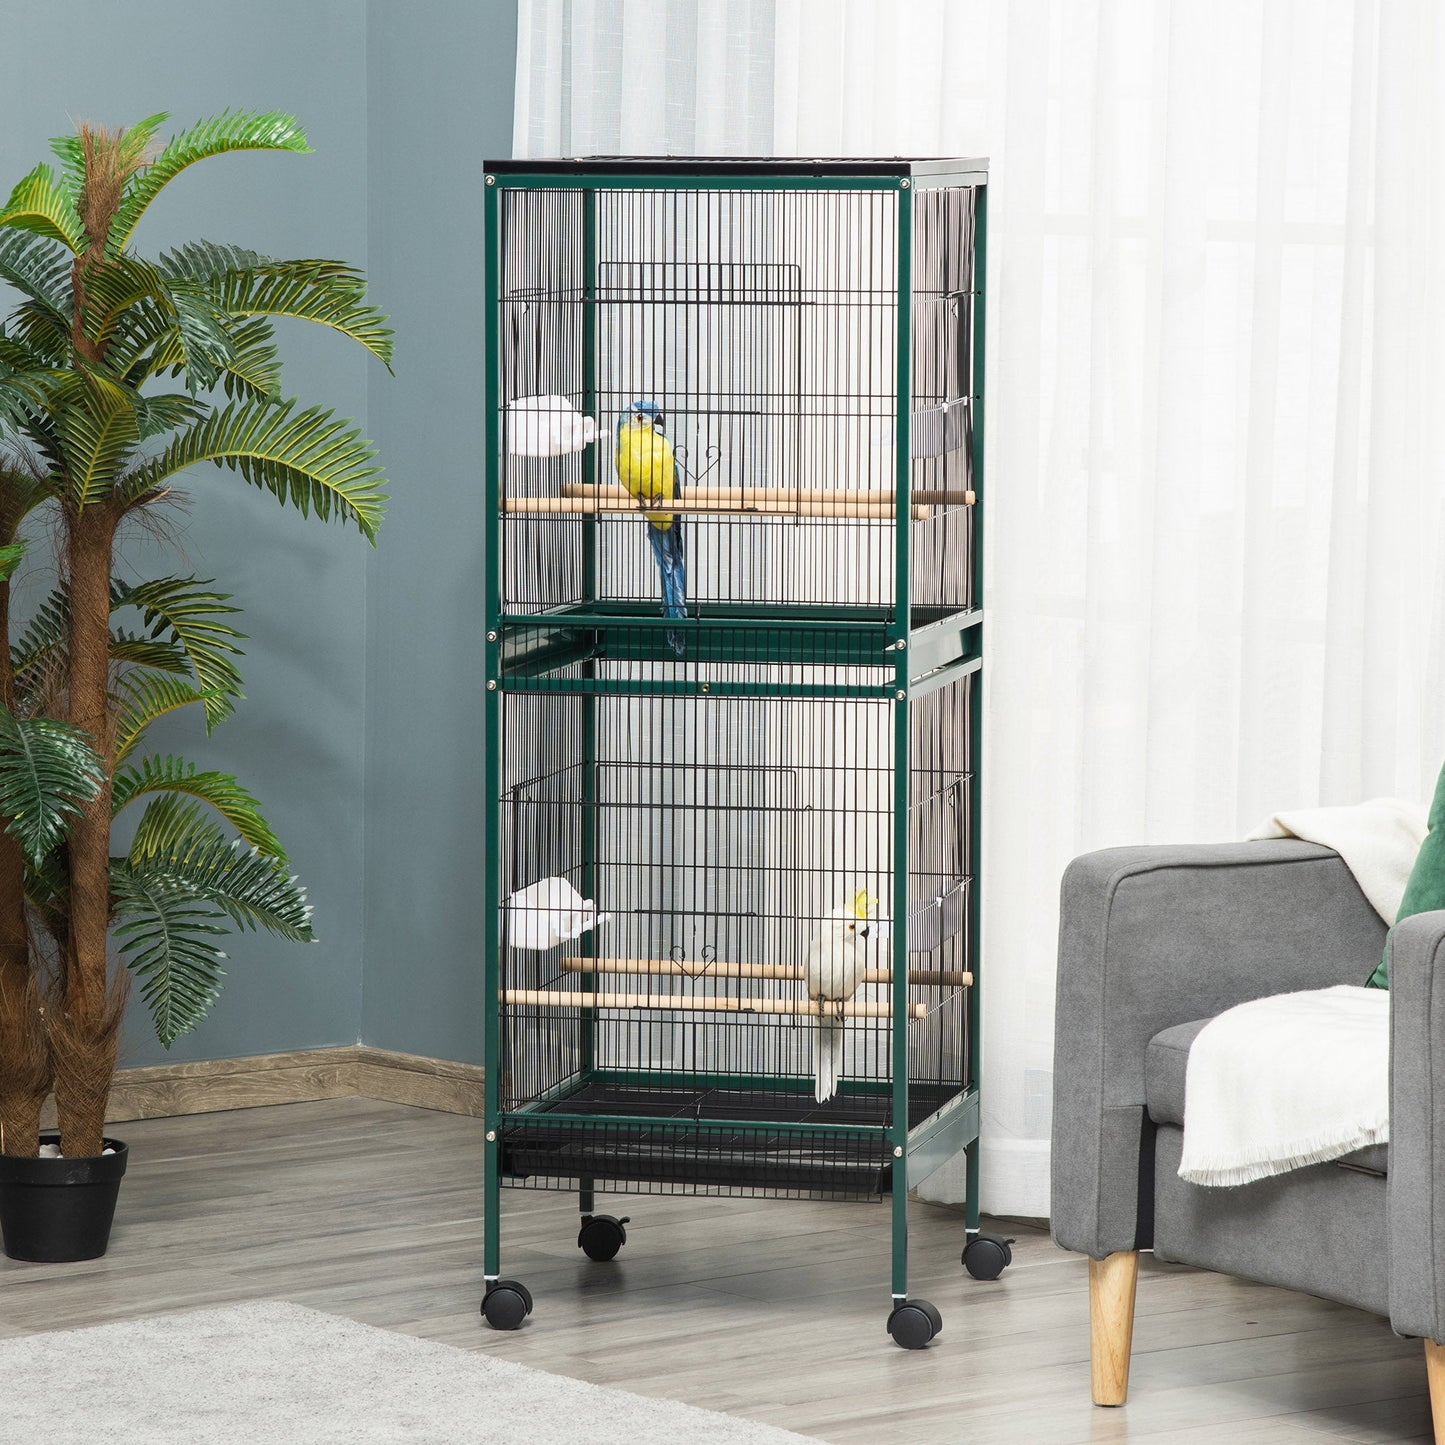 -PawHut 55" 2 In 1 Large Bird Cage Aviary Parakeet House for finches, budgies with Wheels, Slide-out Trays, Wood Perch, Food Containers, Green - Outdoor Style Company